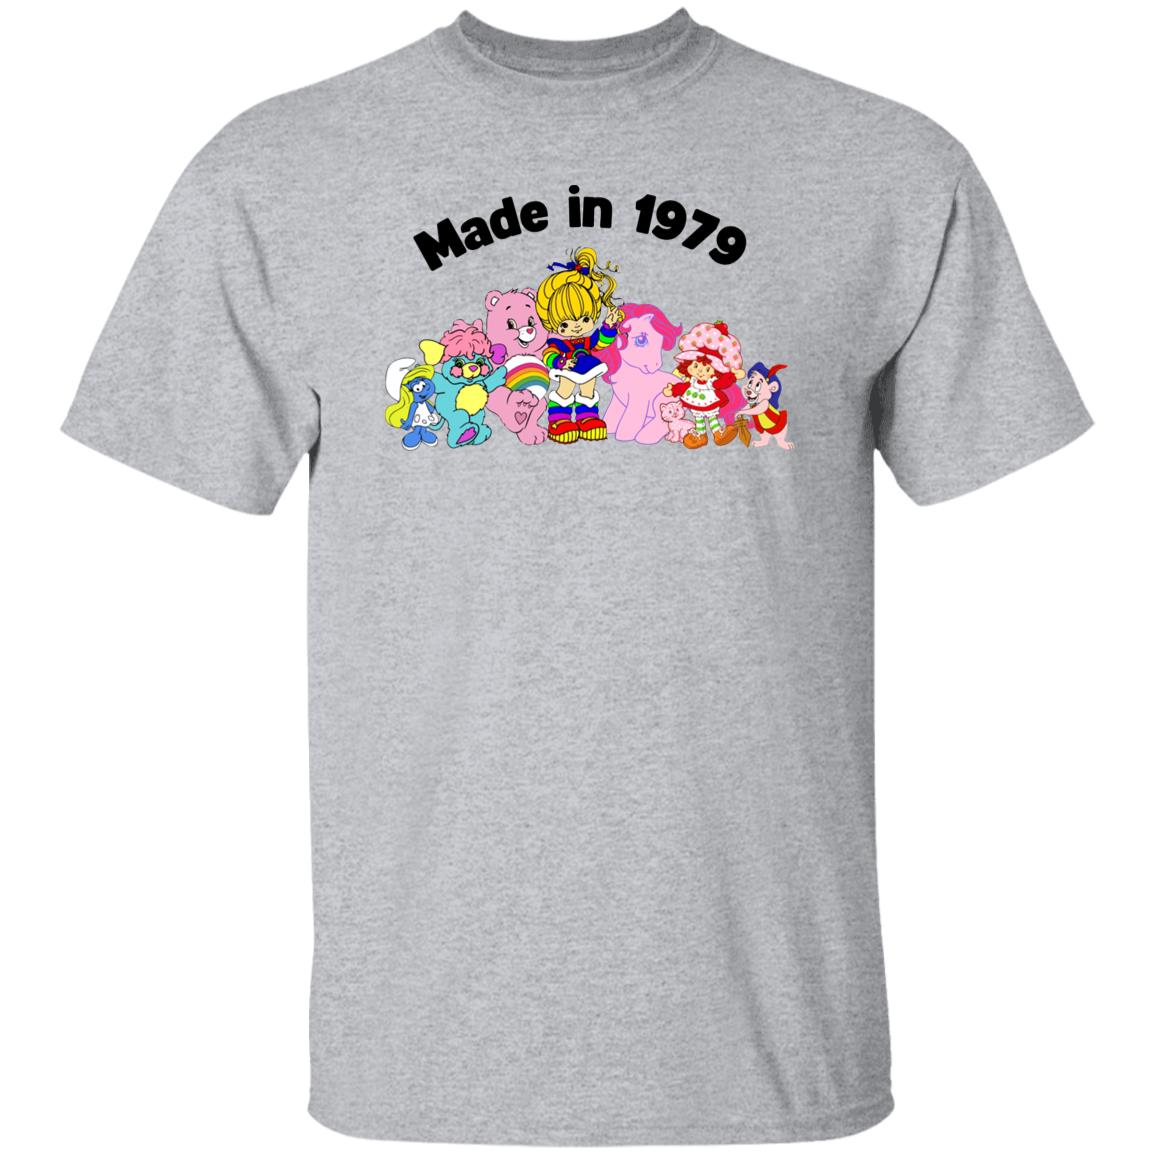 Made in 1979  5.3 oz. T-Shirt